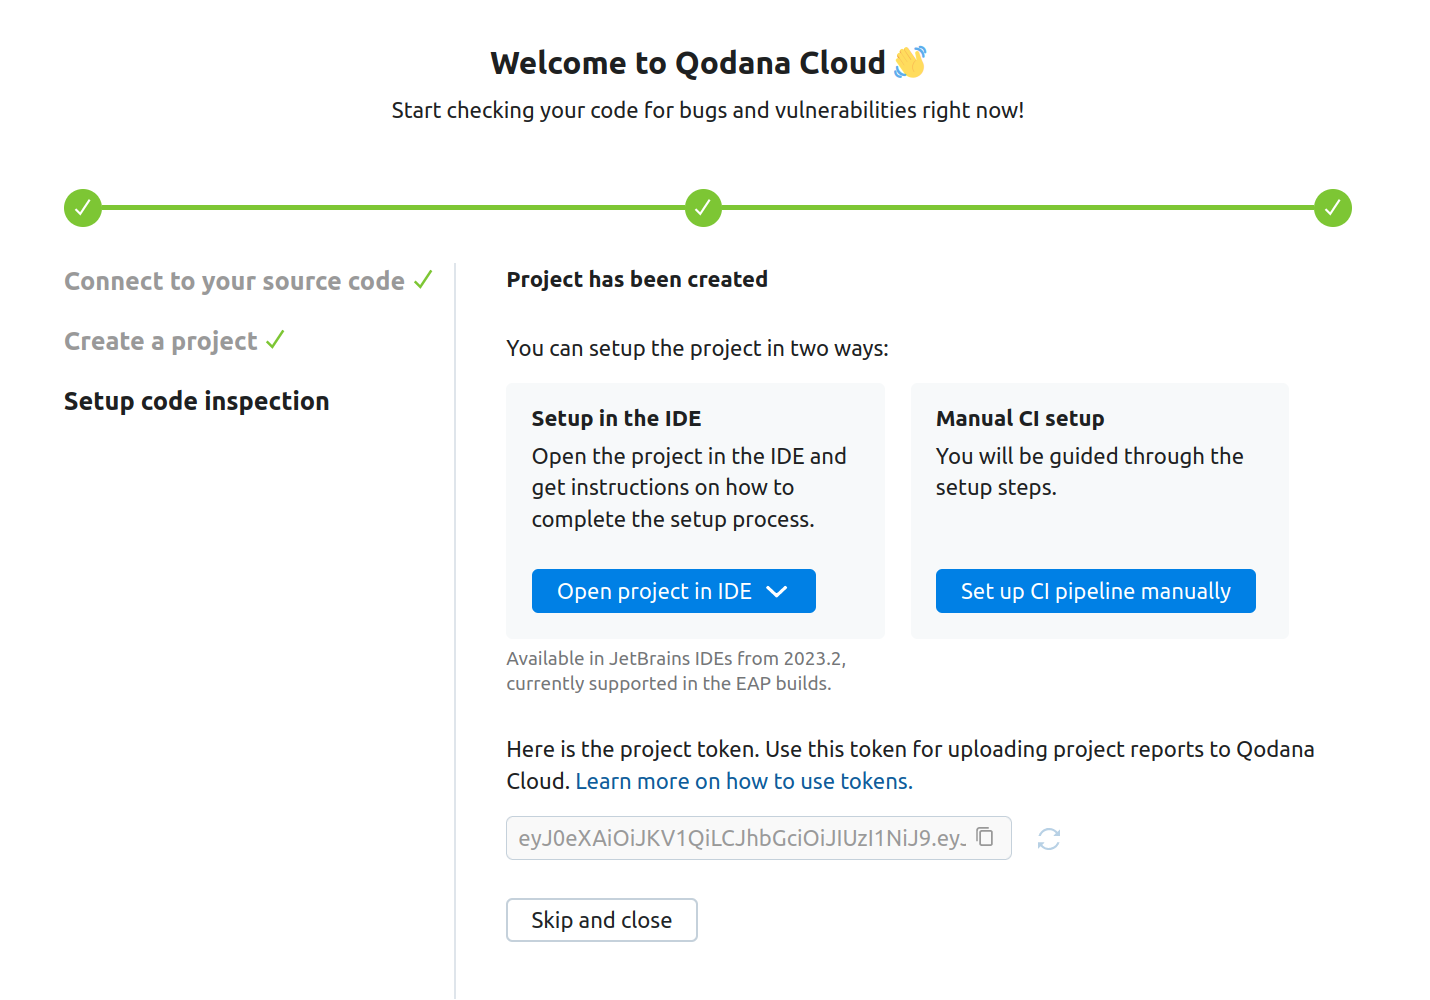 The fourth step of the Qodana Cloud onboarding